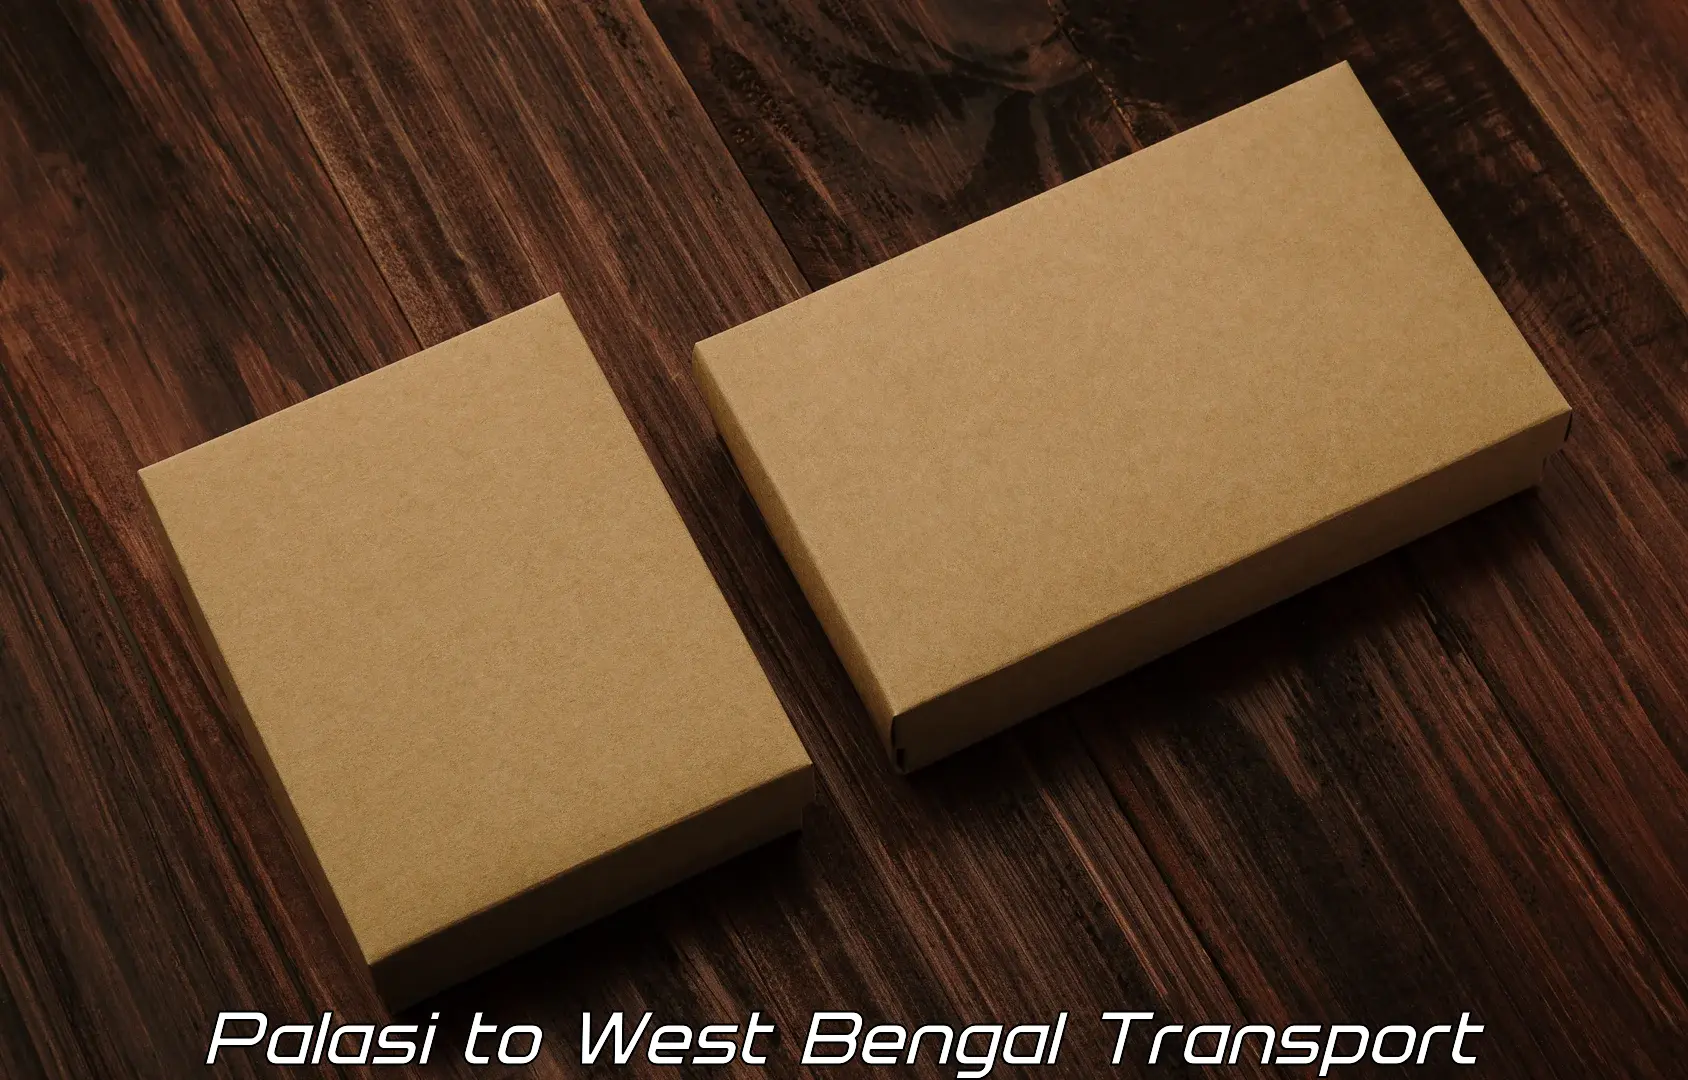 Road transport services Palasi to West Bengal